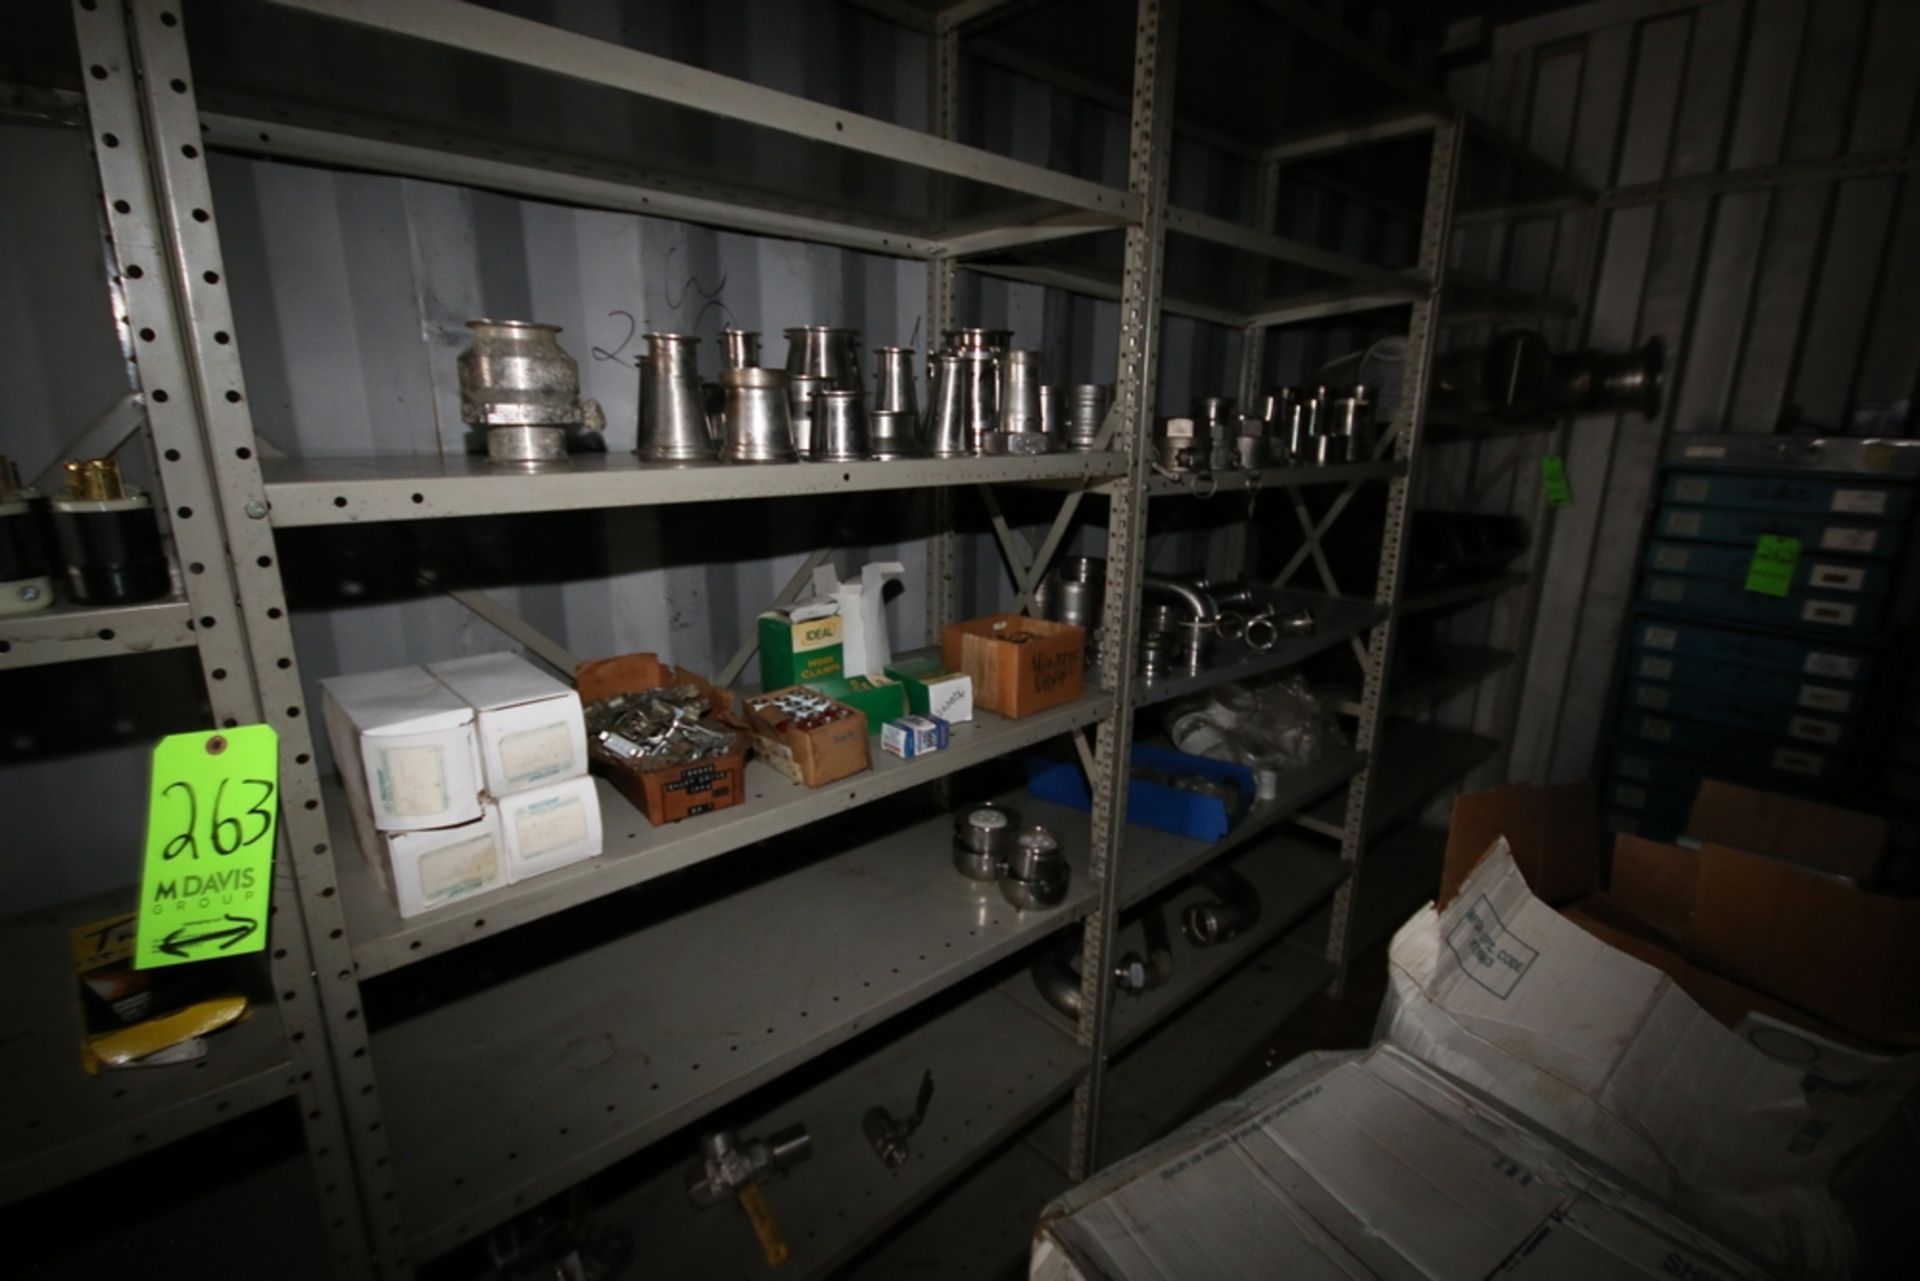 6-Shelving Units with Contents, Includes PD Pump Propeller, Actuated Ball Valves, Threaded S/S - Image 3 of 4